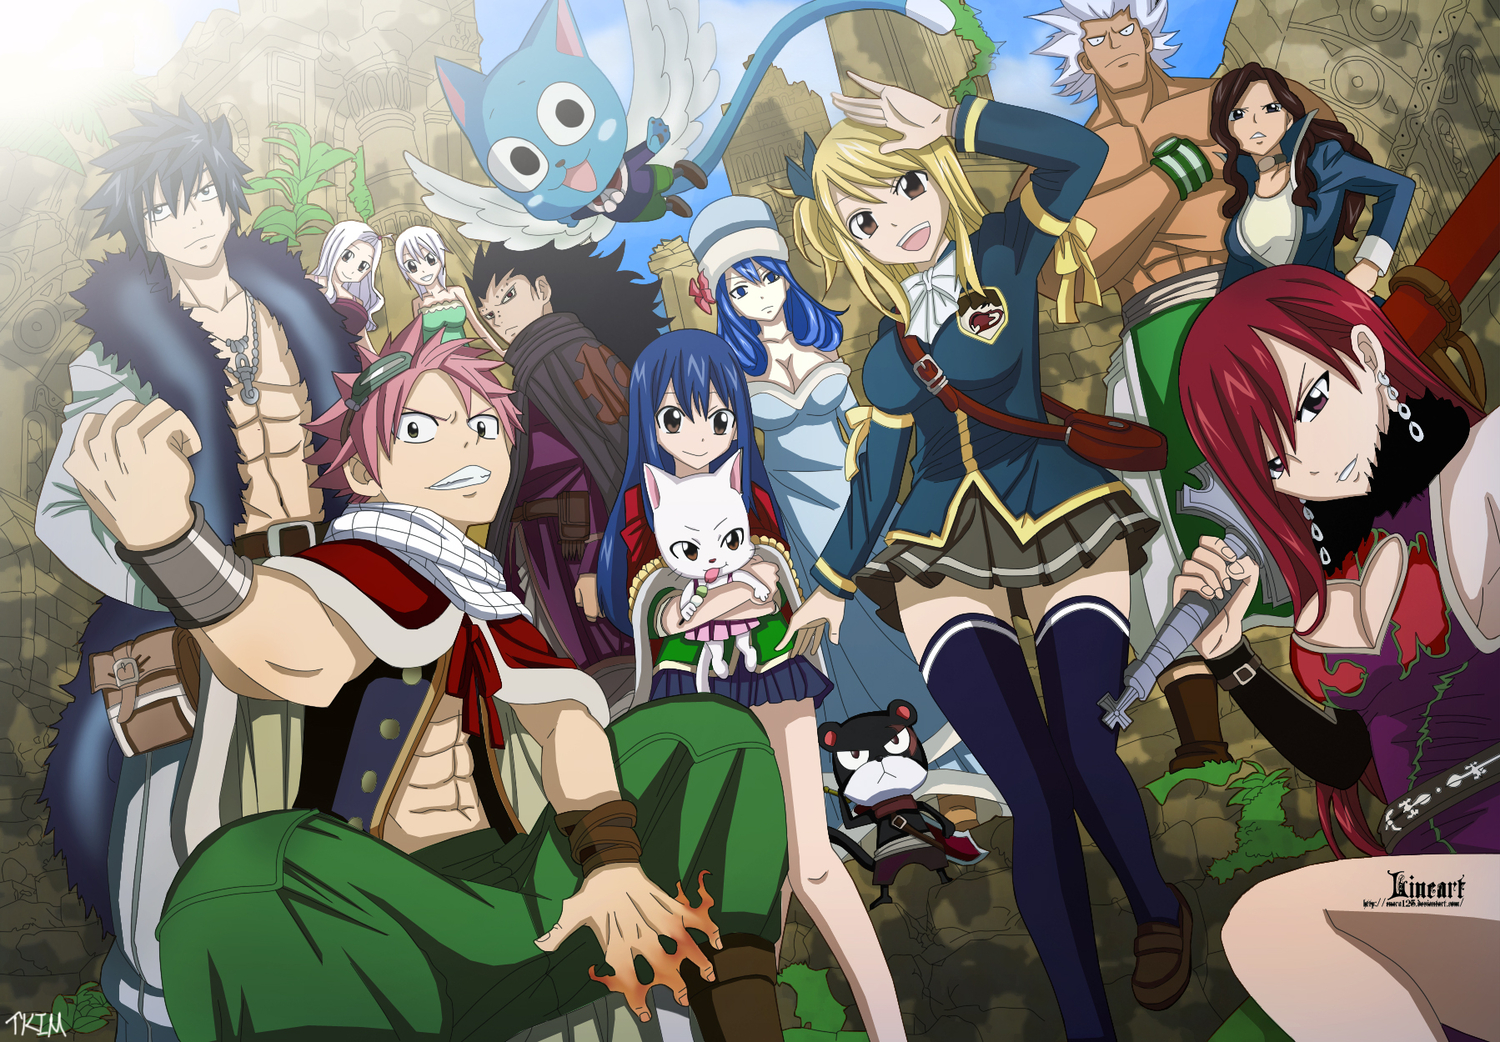 NaluNatsuxLucy Images Fairy Tail3 HD Wallpaper And Background